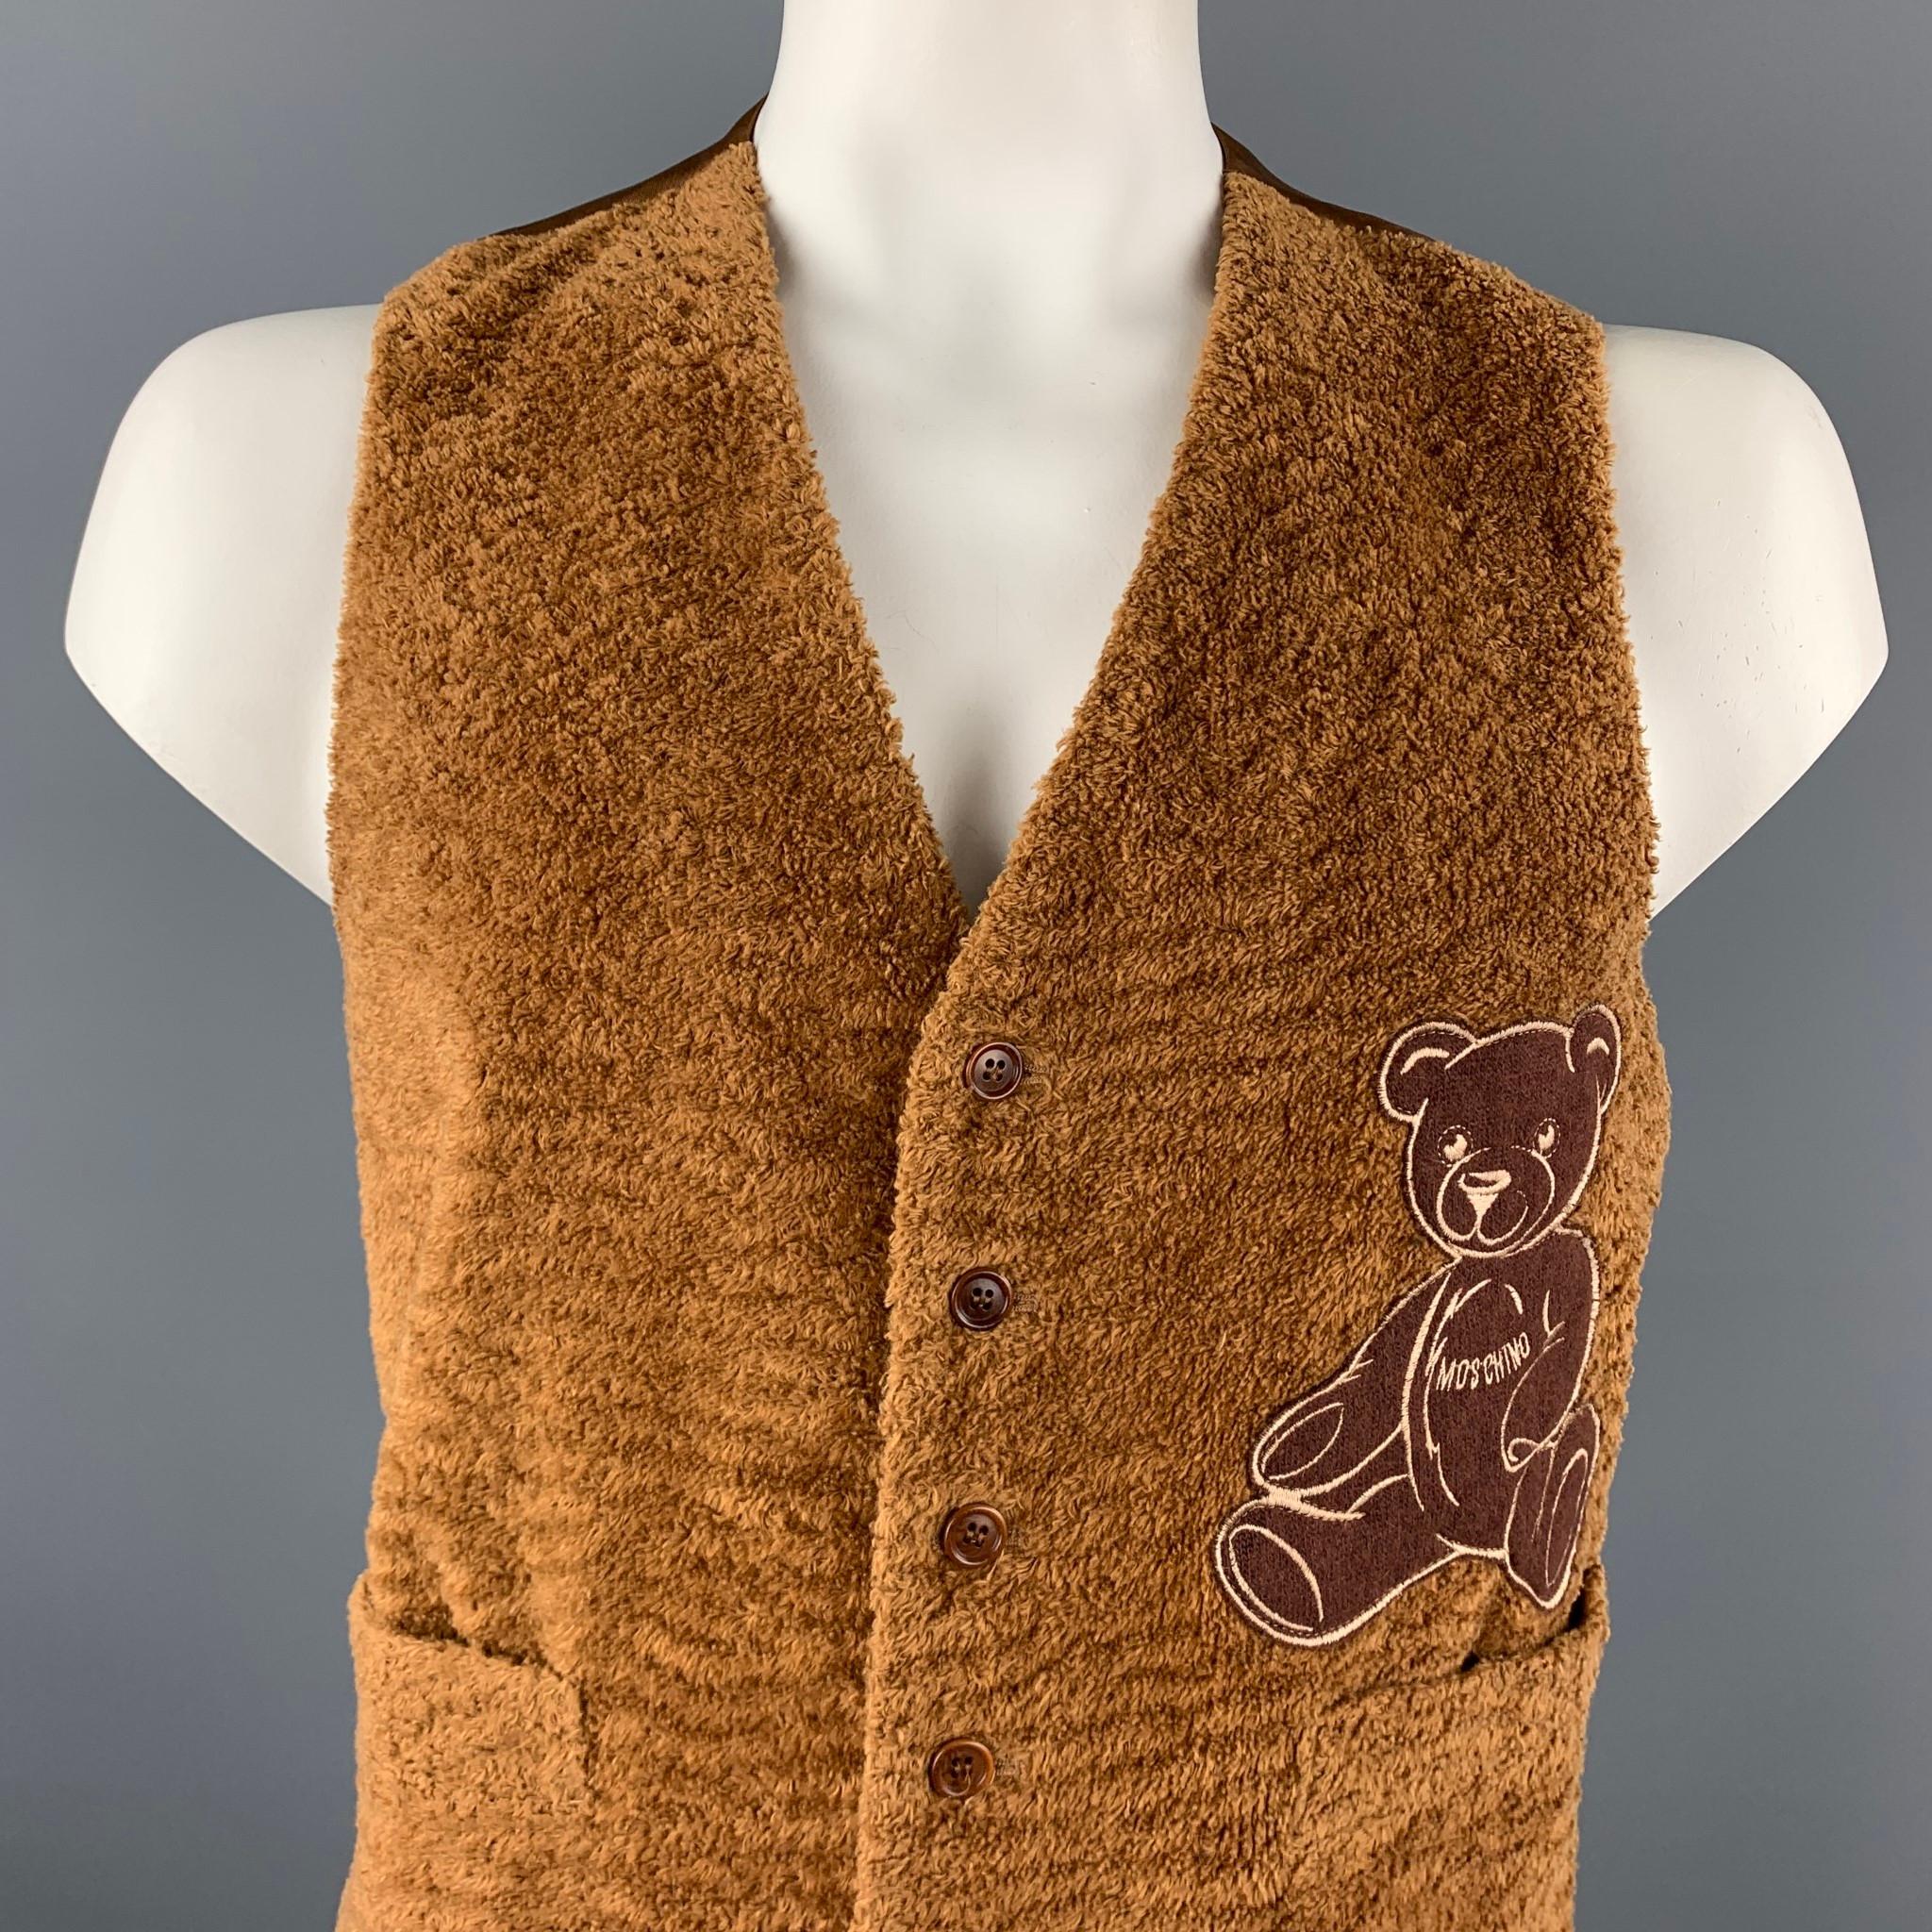 MOSCHINO vest comes in a brown textured cotton with a bear embroidered design featuring slit pockets, back belt, and a buttoned closure. Made in Italy.

Very Good Pre-Owned Condition.
Marked: 44

Measurements:

Shoulder: 14 in. 
Chest: 42 in.